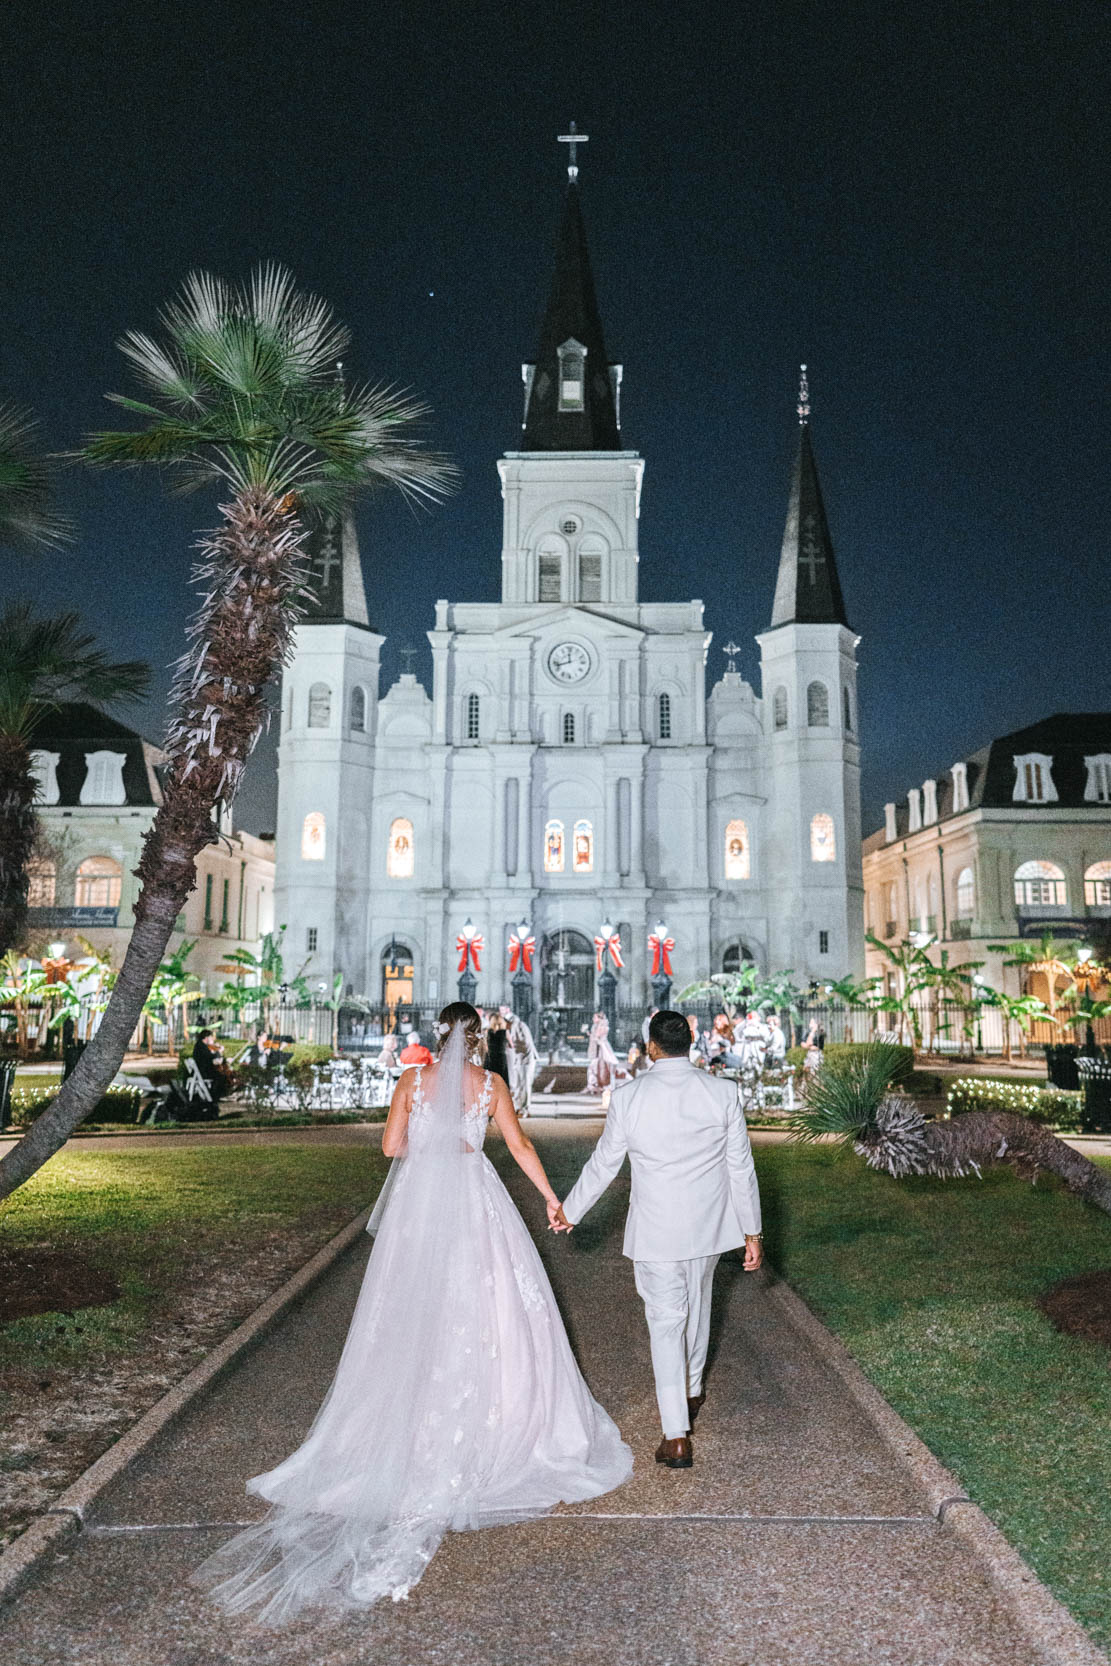 Bride and Groom having wedding at Jackson Square in New Orleans